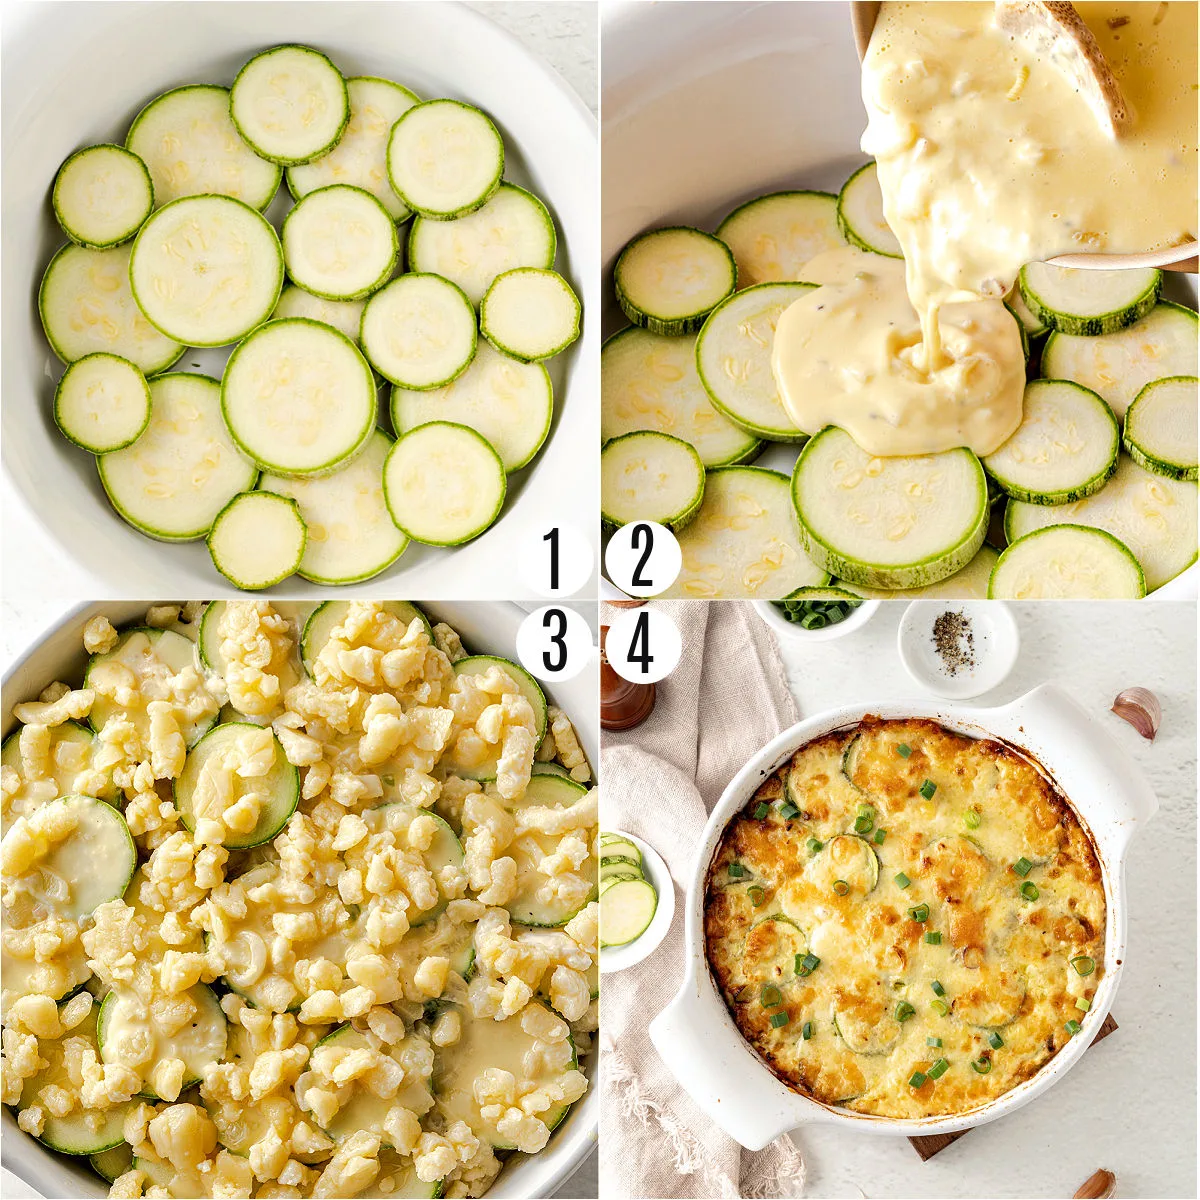 Step by step photos showing how to make zucchini casserole.